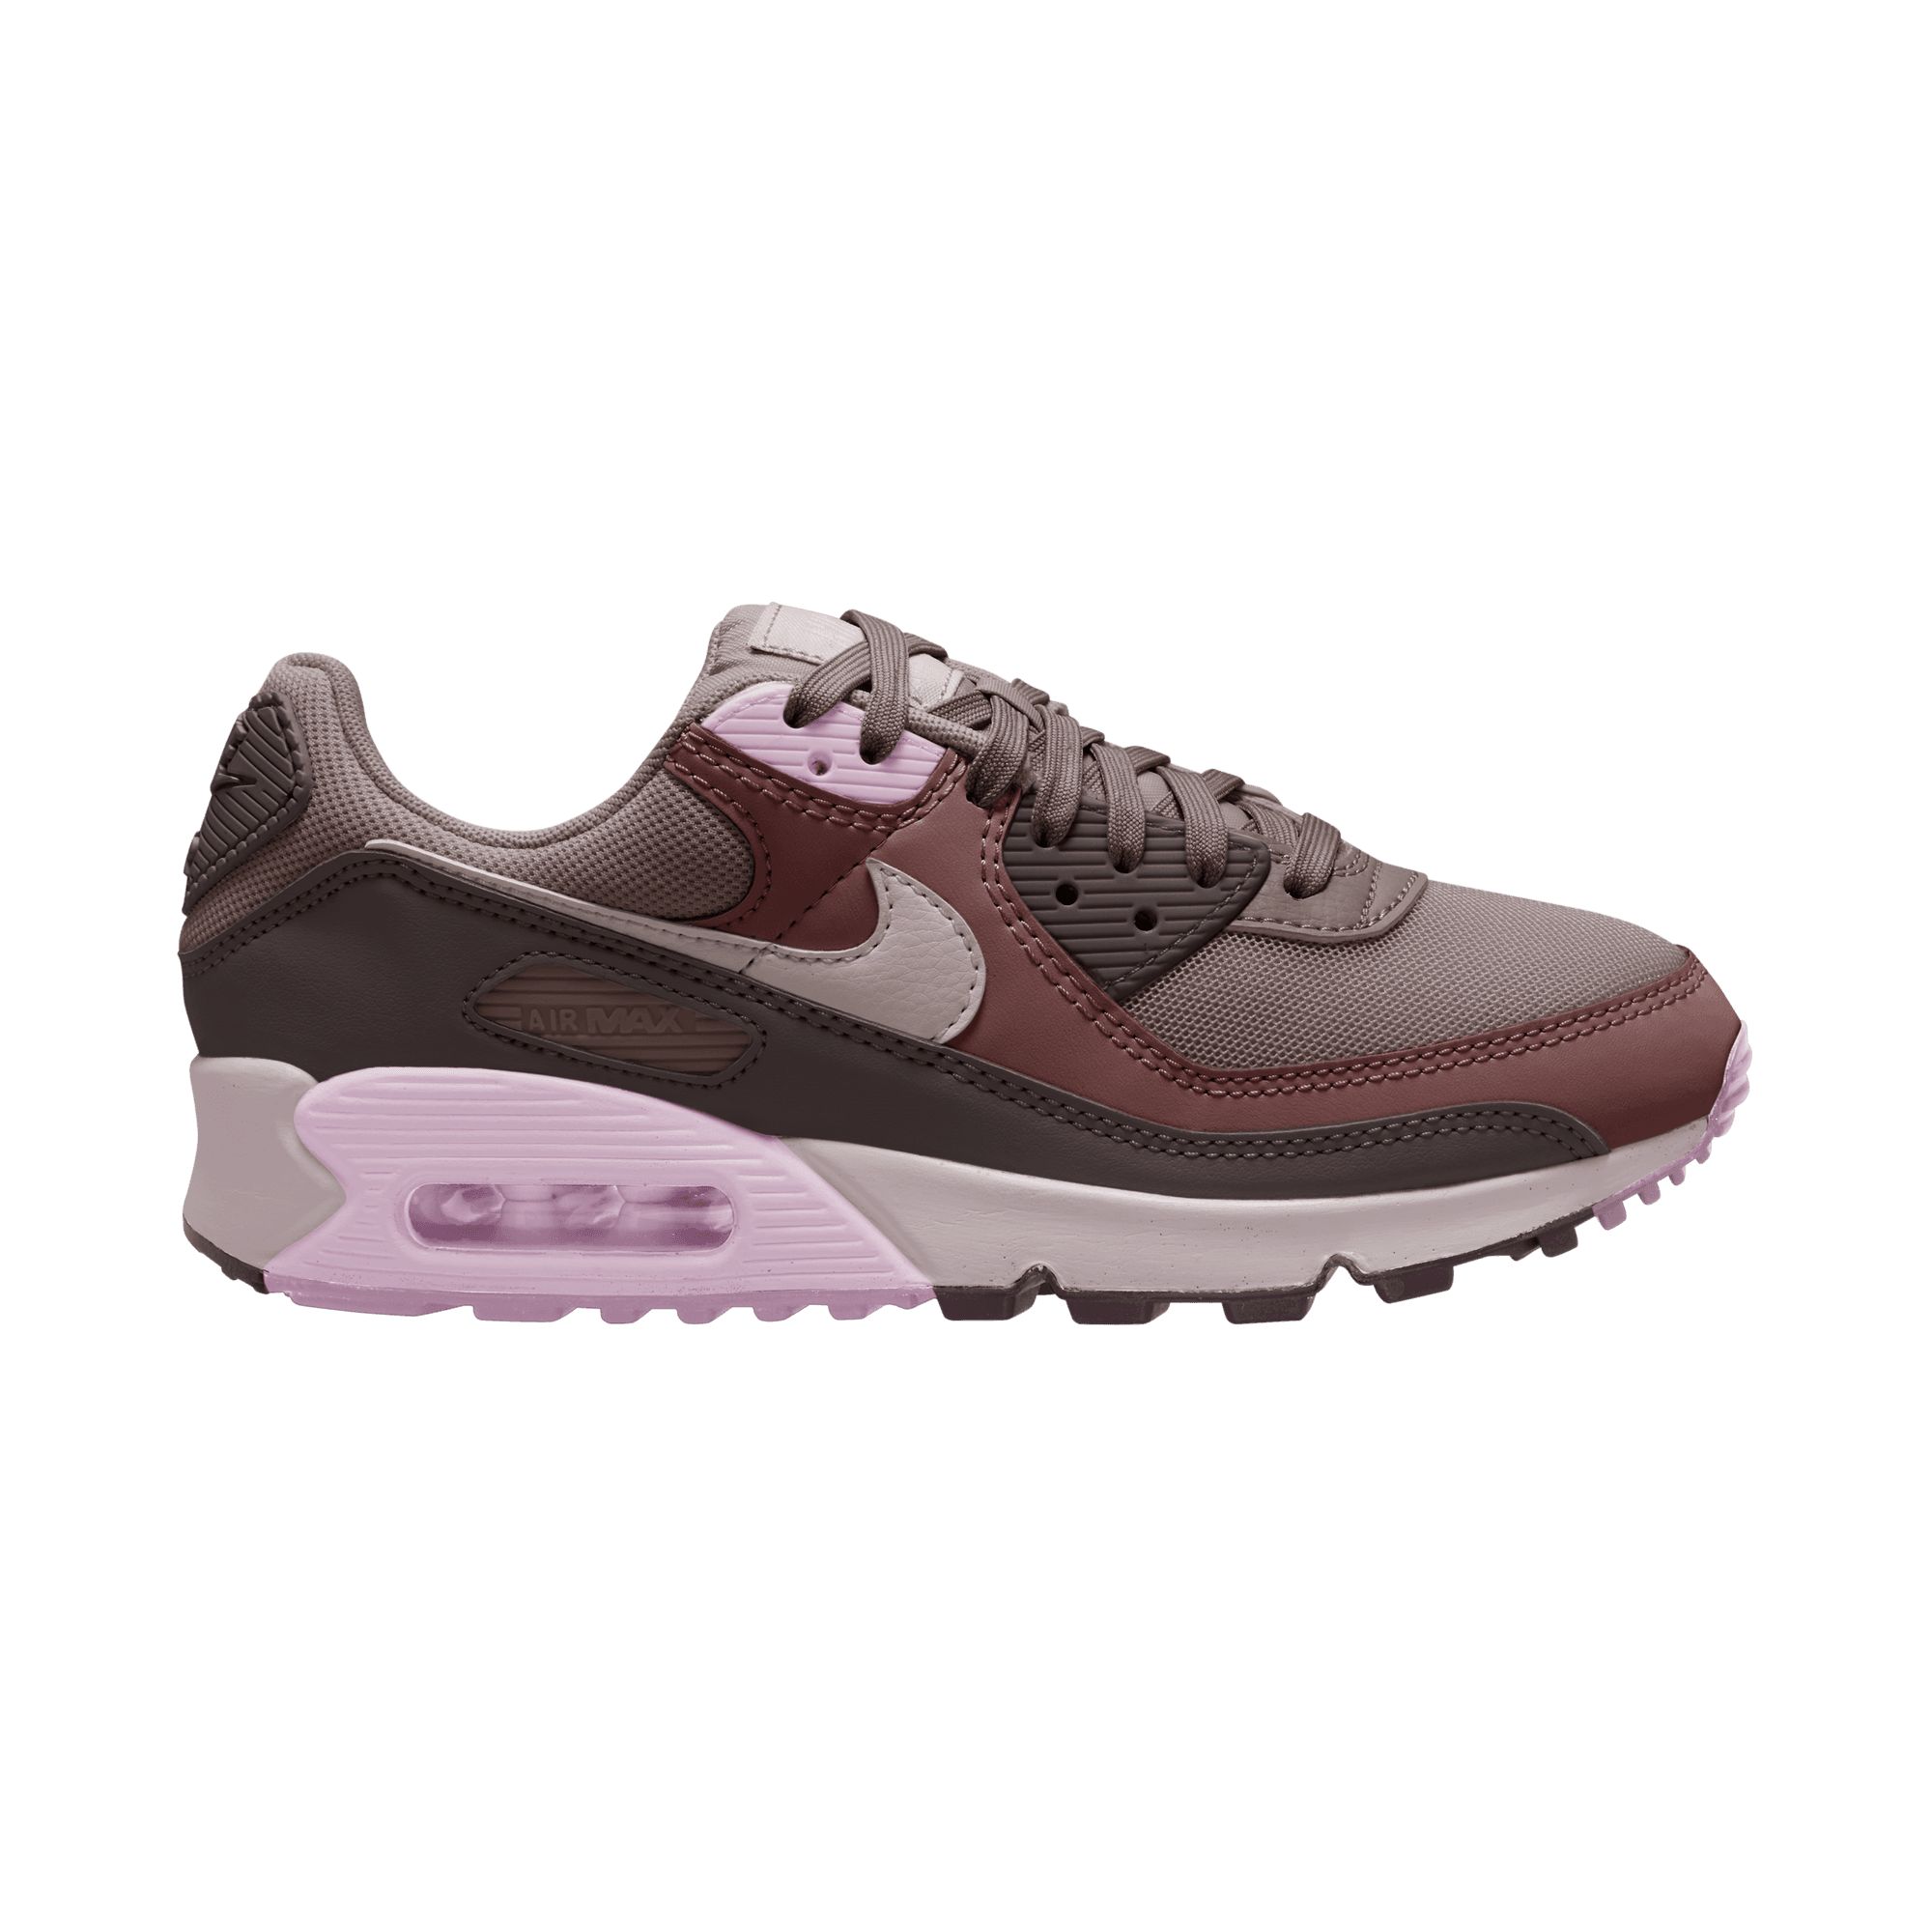 Image of Nike Women's Air Max 90 Shoes